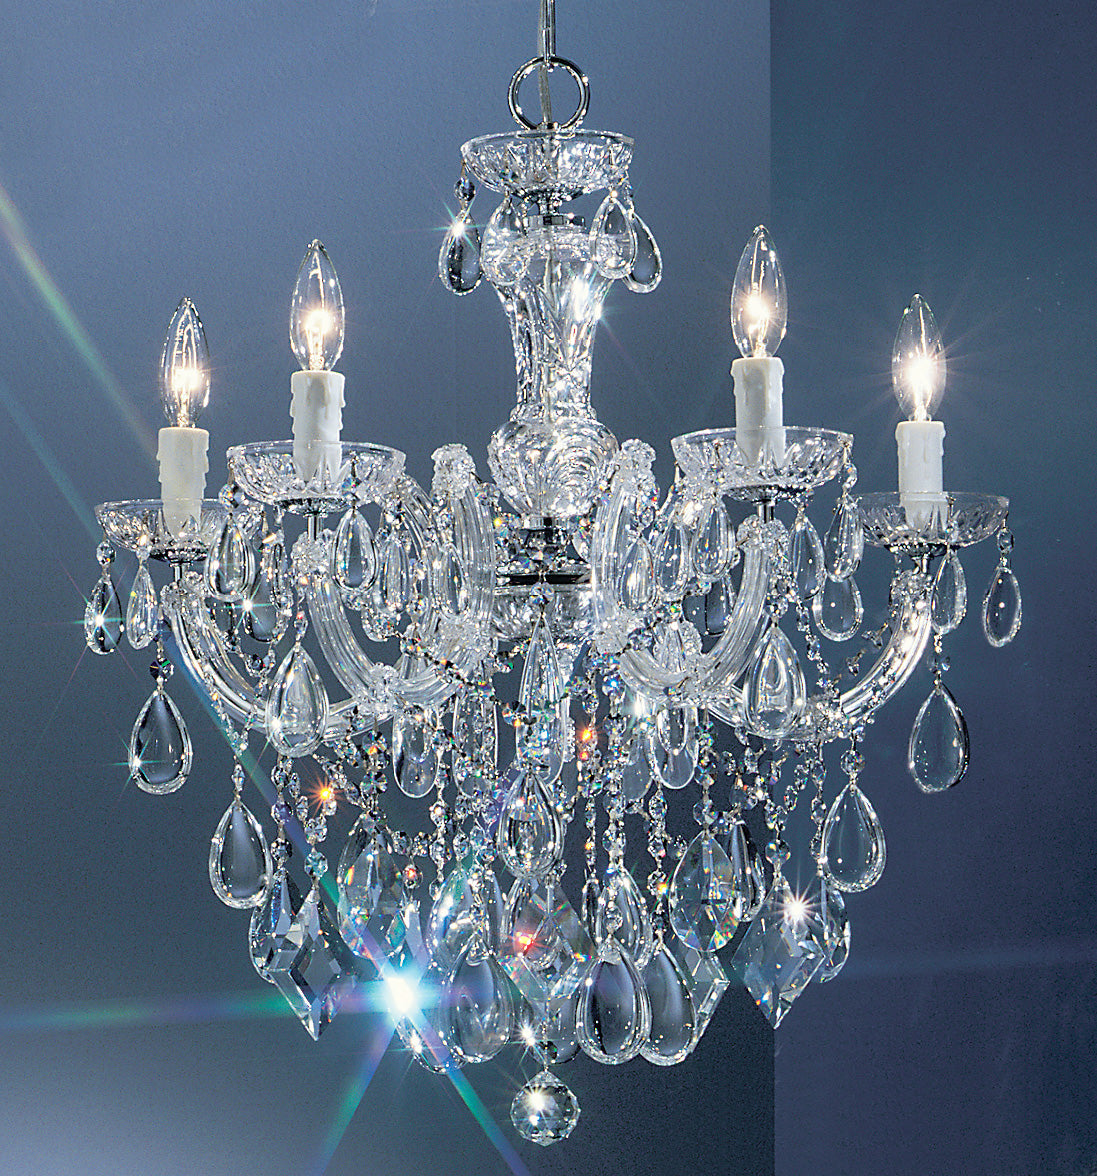 Classic Lighting 8355 CH C Rialto Contemporary Crystal Chandelier in Chrome